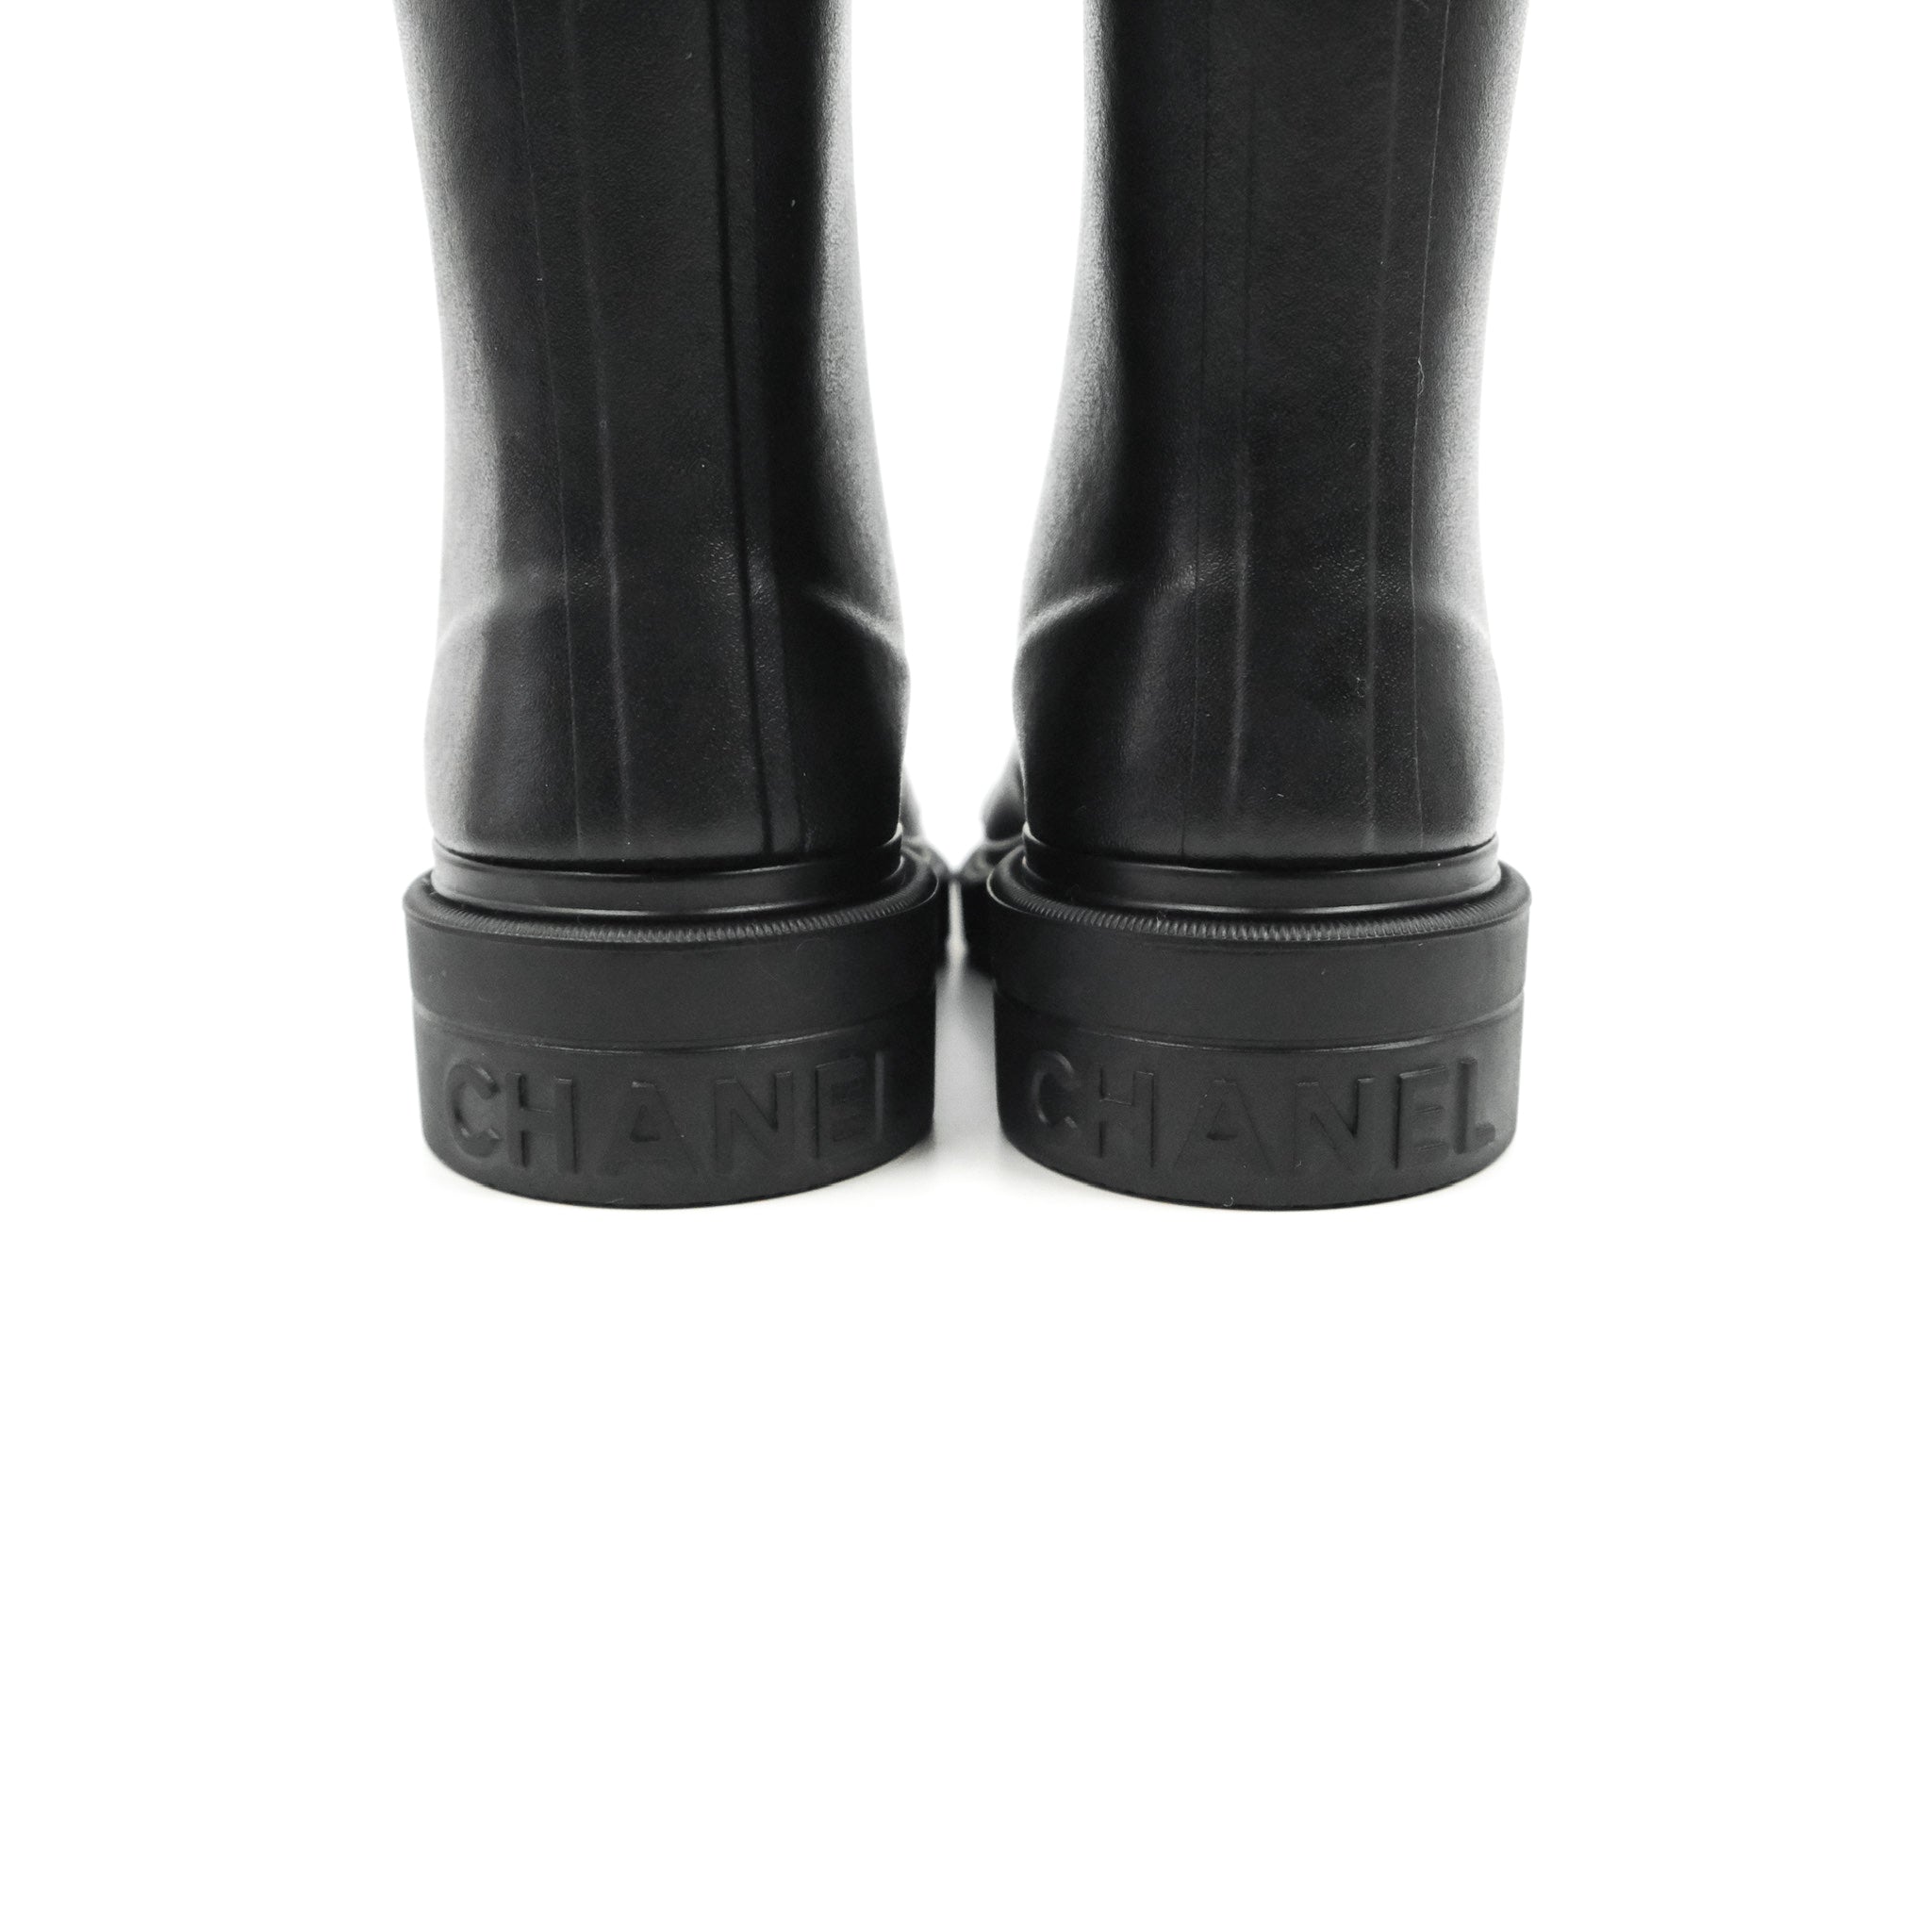 Sold at Auction: Chanel tall black boot